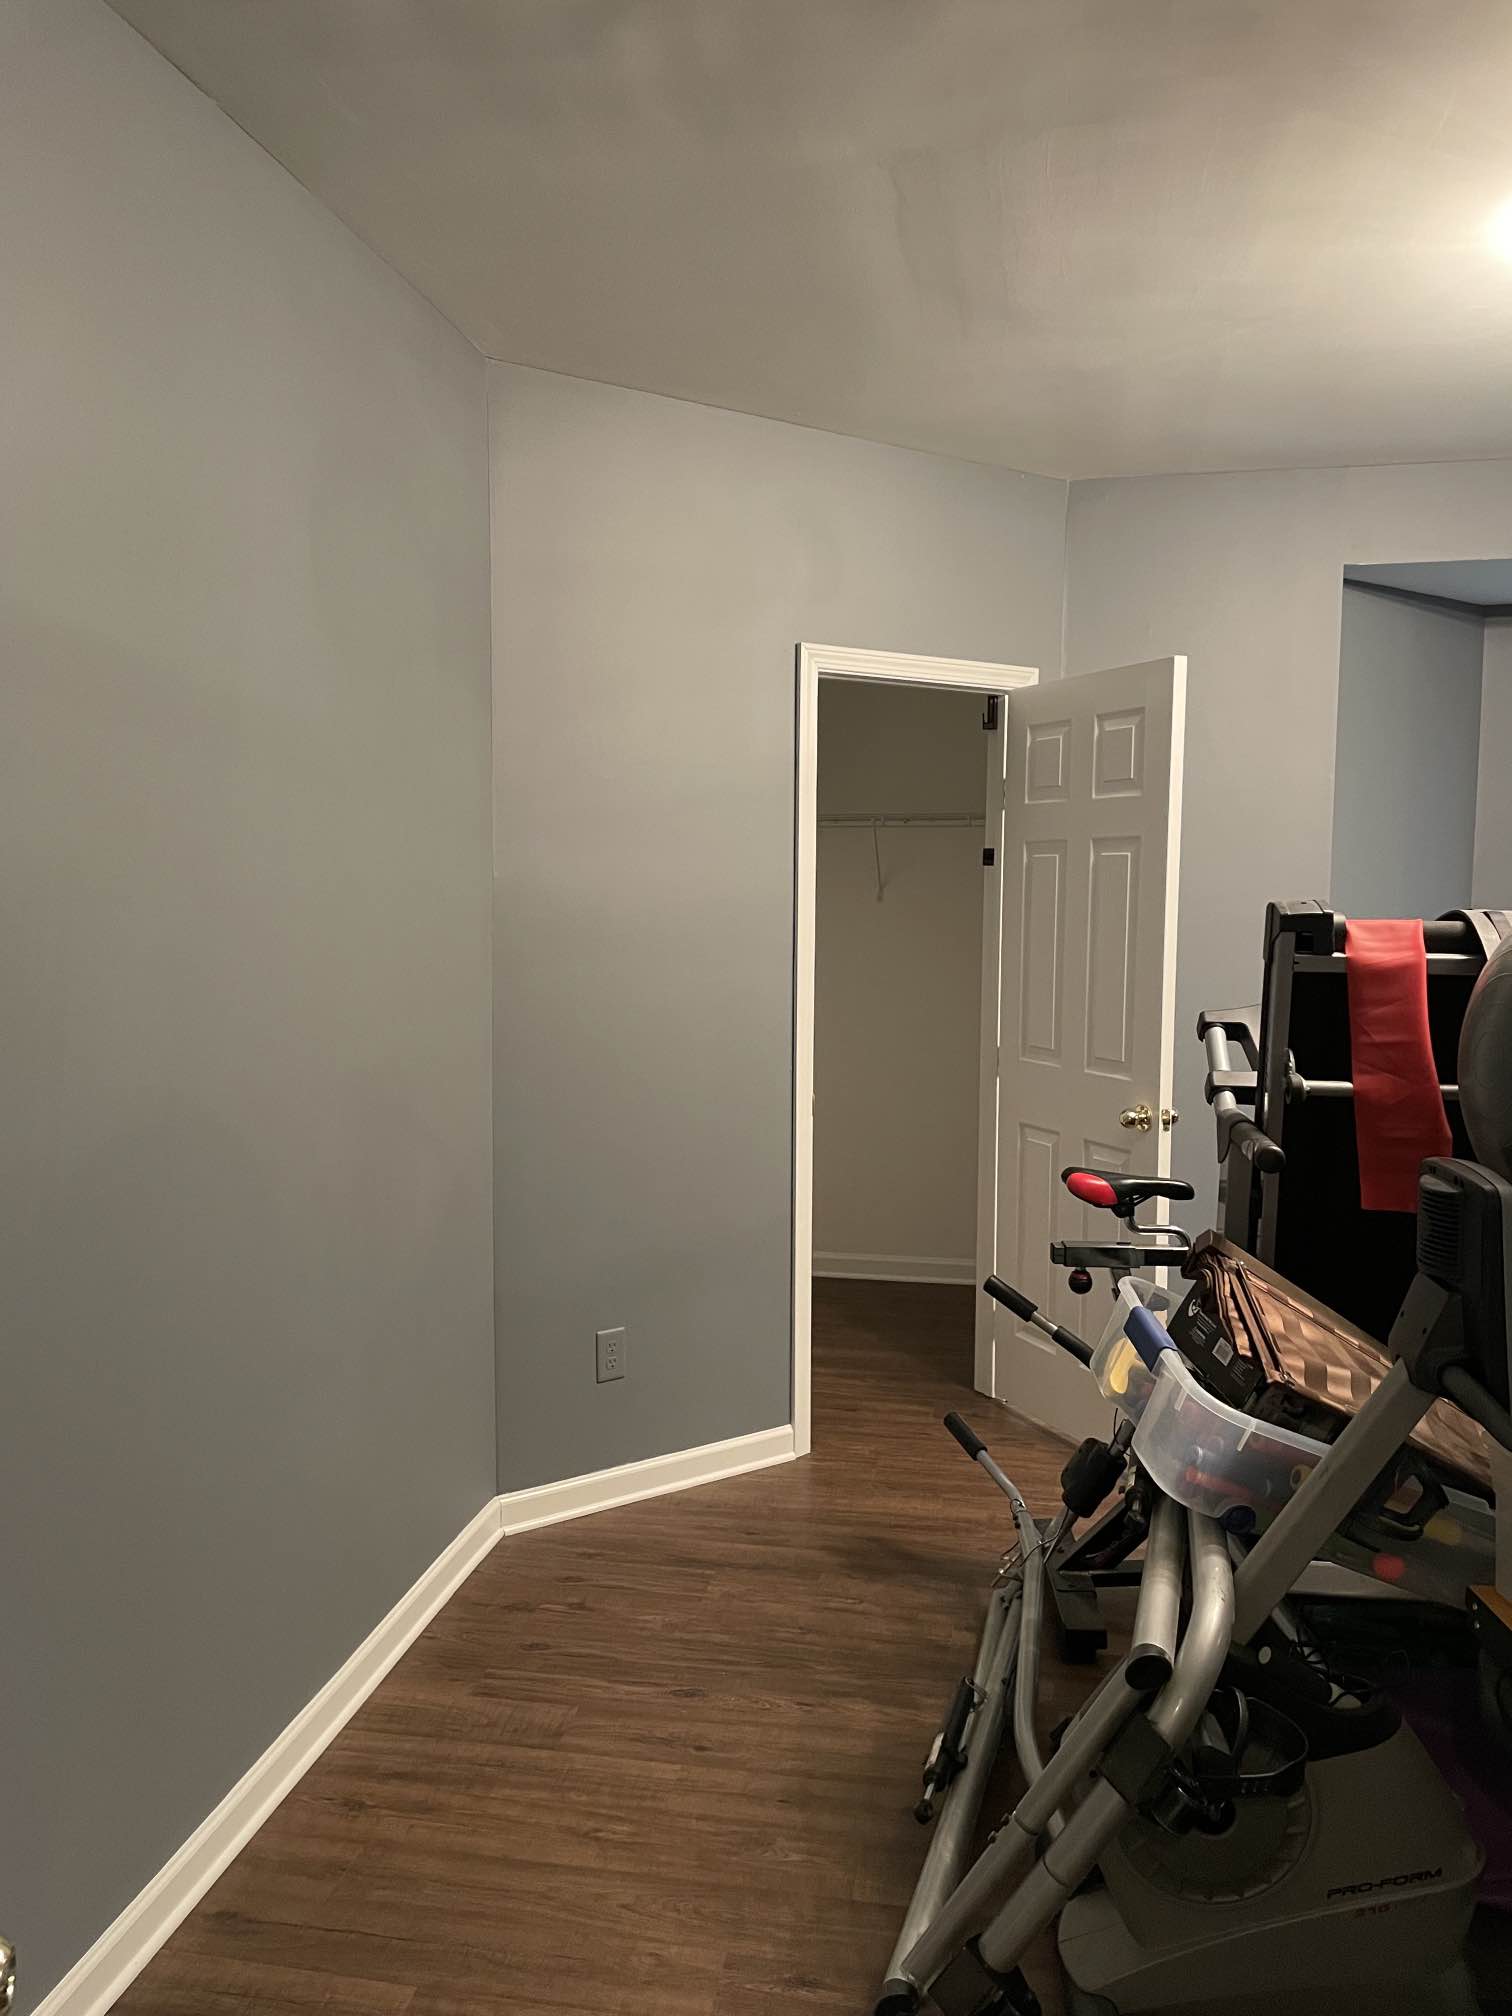 Interior Guest Room Update After